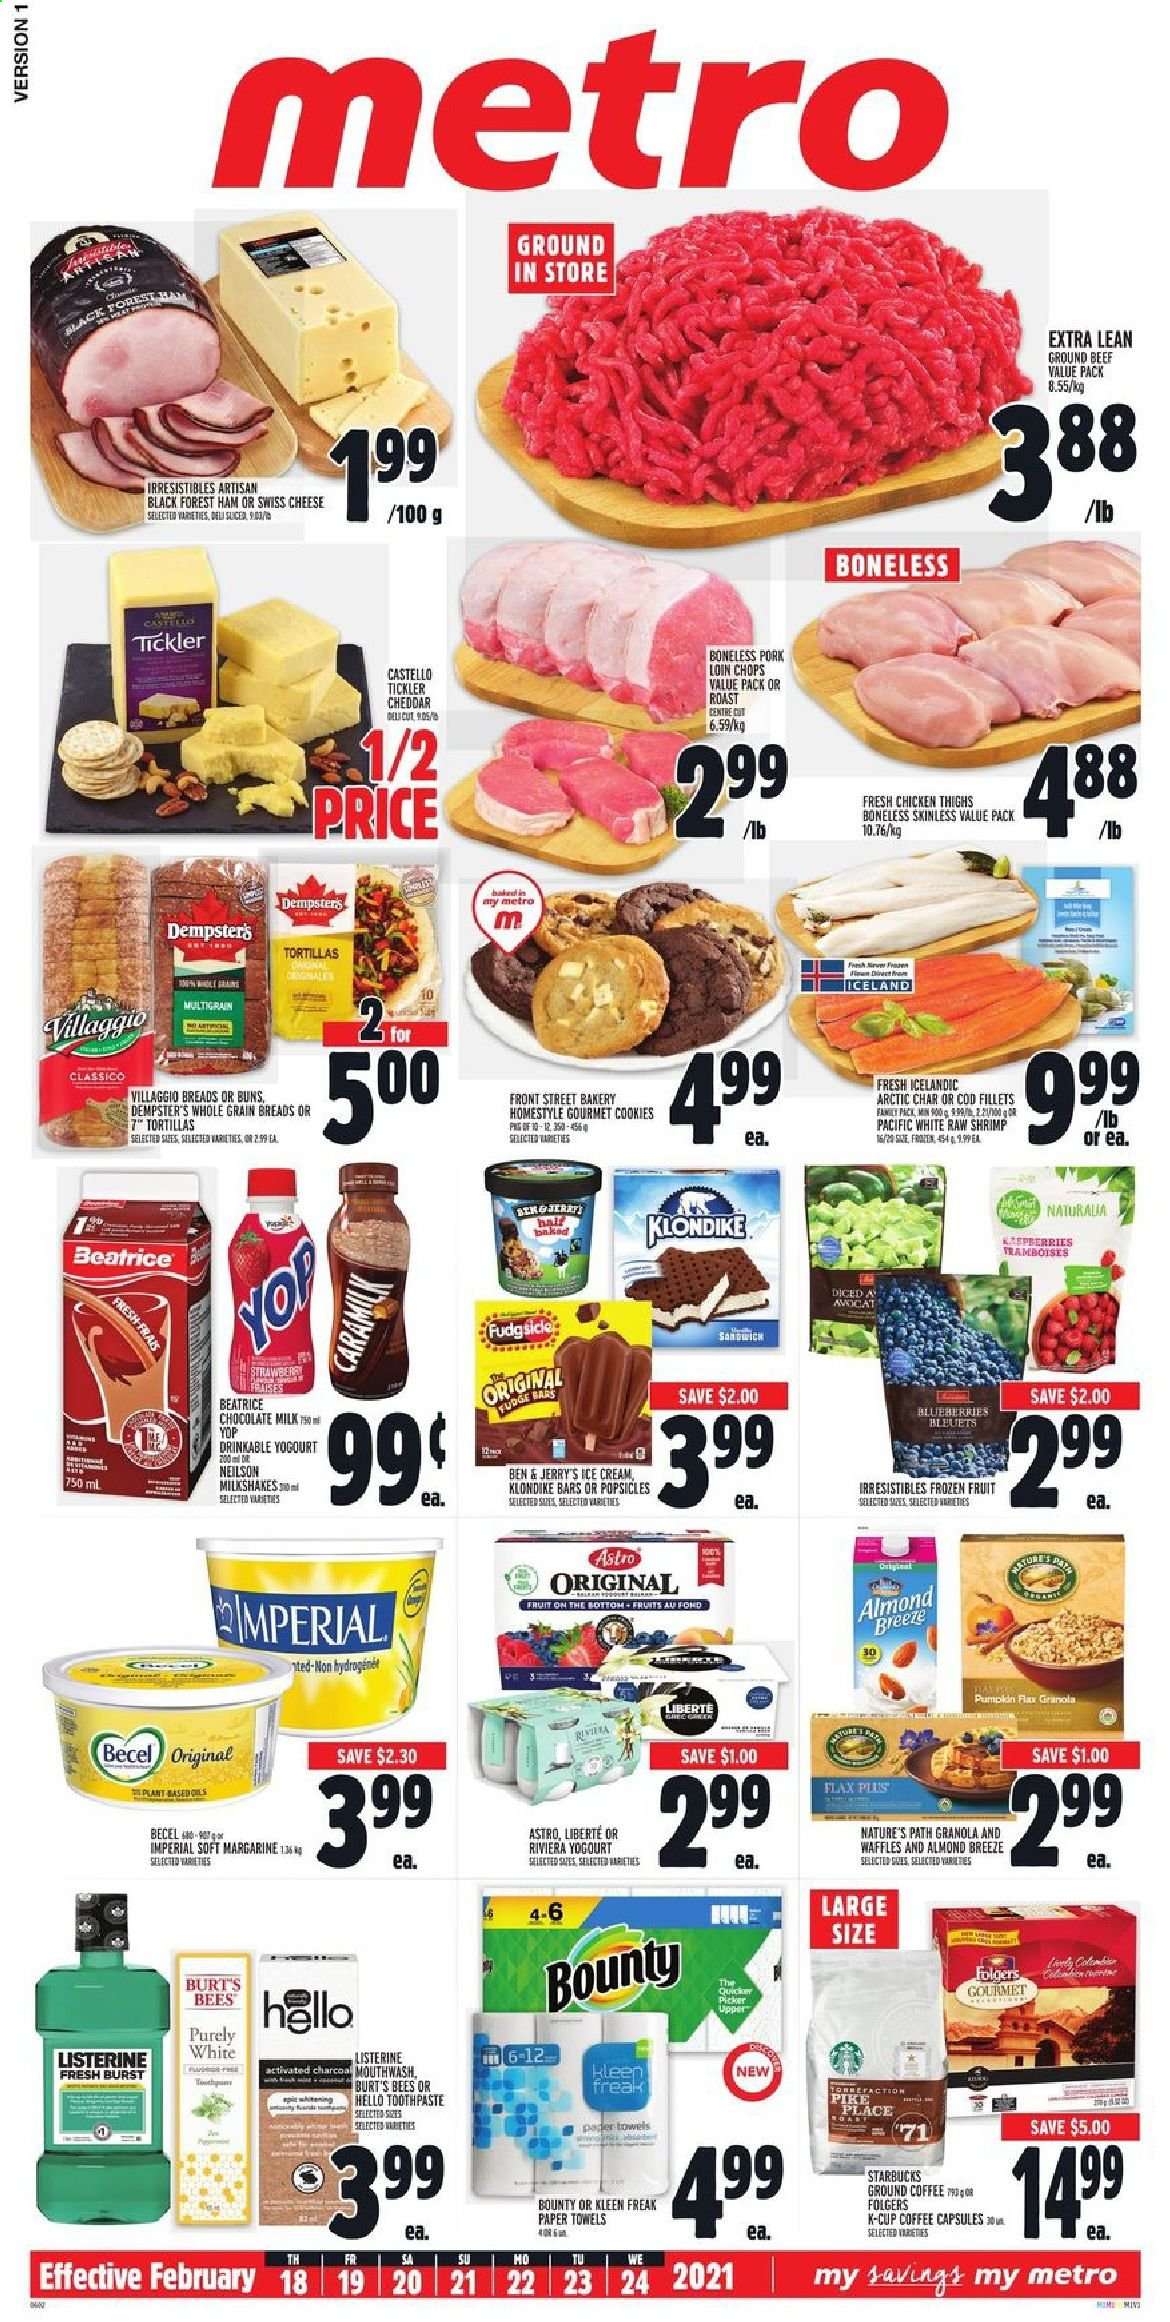 thumbnail - Metro Flyer - February 18, 2021 - February 24, 2021 - Sales products - tortillas, pie, buns, blueberries, cod, shrimps, ham, swiss cheese, cheddar, cheese, milk, Almond Breeze, ice cream, Ben & Jerry's, cookies, fudge, milk chocolate, Bounty, Classico, coffee, Folgers, ground coffee, coffee capsules, Starbucks, K-Cups, chicken thighs, chicken, beef meat, ground beef, pork chops, pork loin, pork meat, kitchen towels, paper towels, mouthwash, slicer, activated charcoal, granola, Listerine. Page 1.